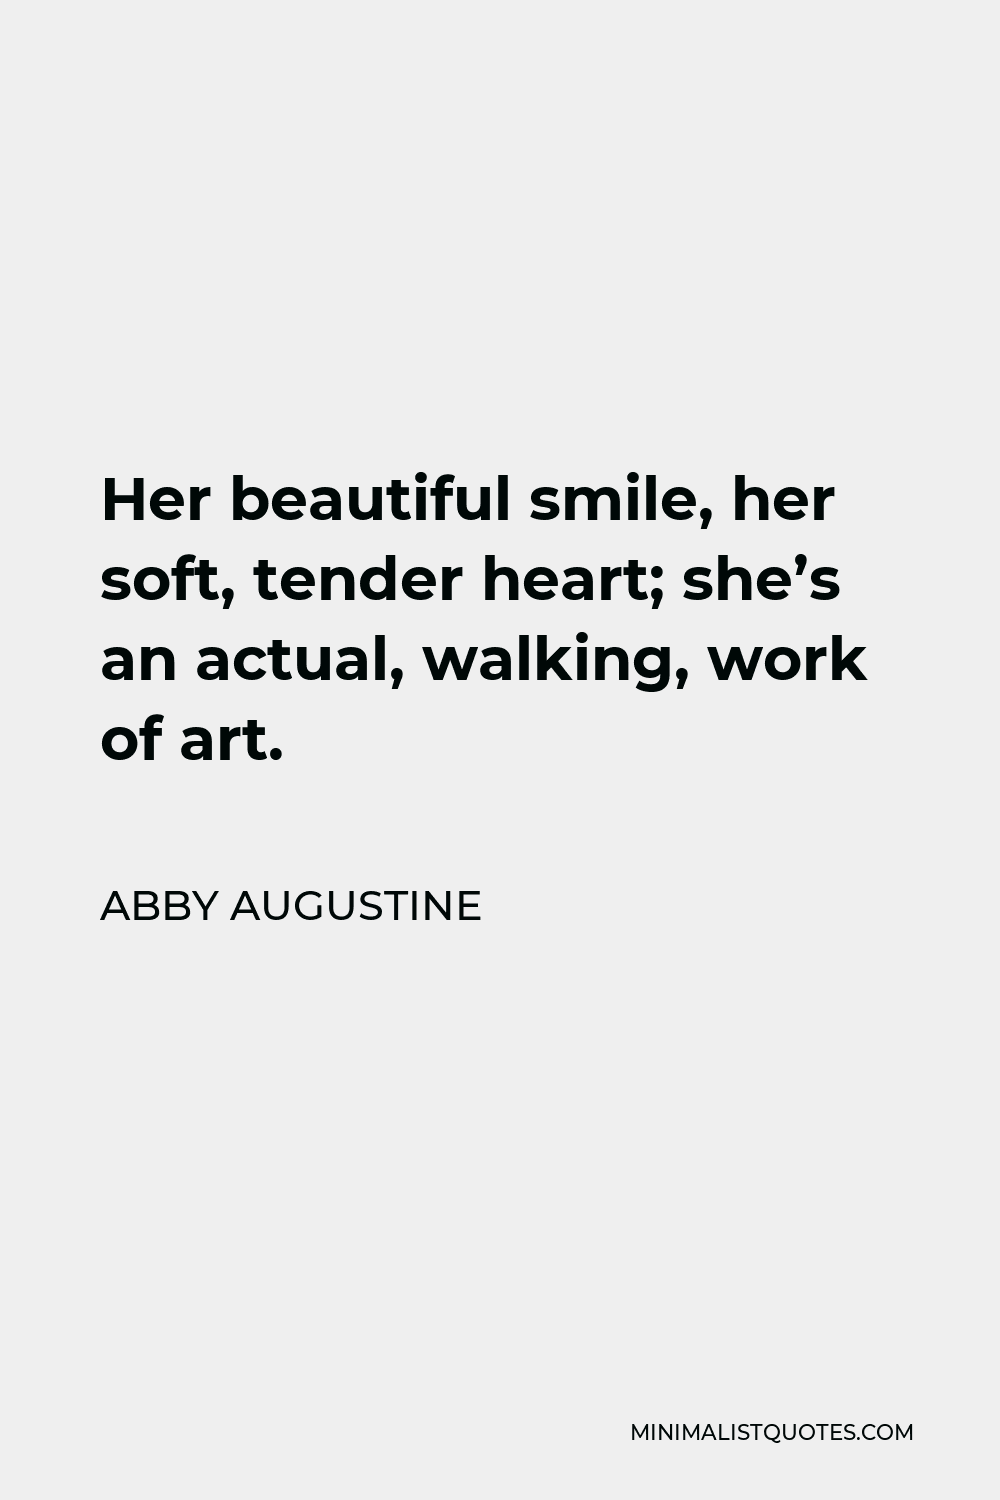 Abby Augustine Quote - Her beautiful smile, her soft, tender heart; she’s an actual, walking, work of art.